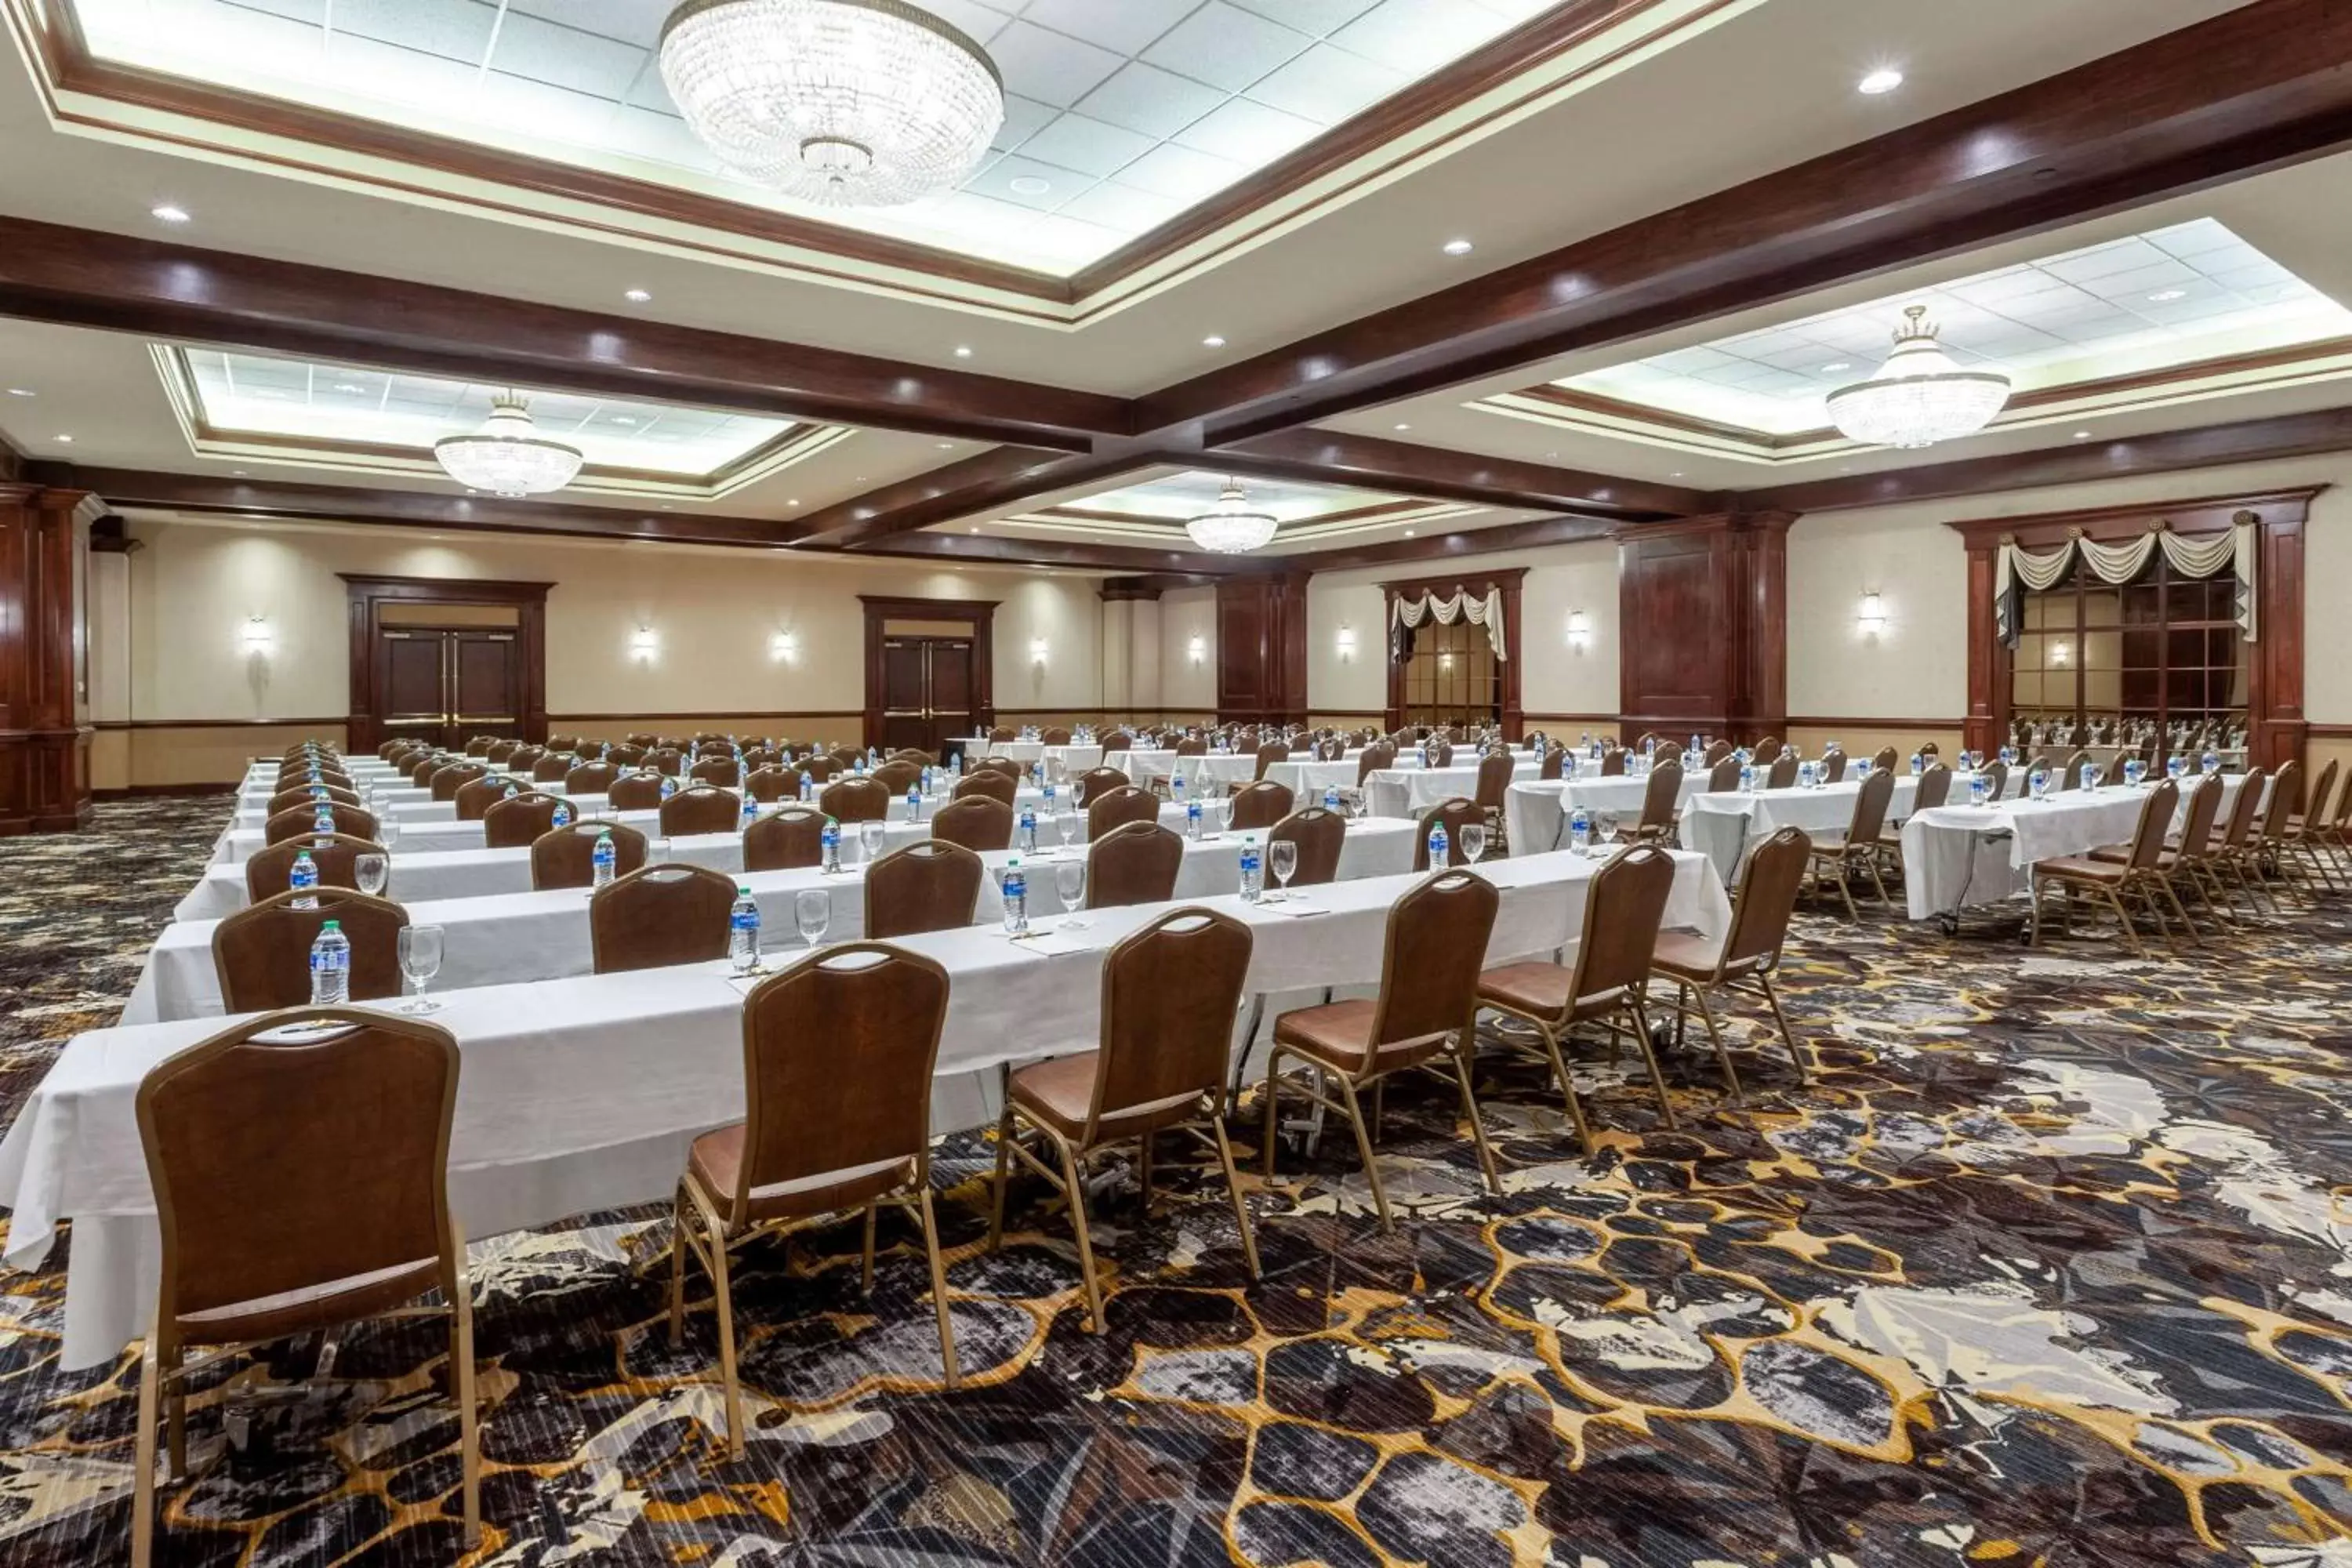 Meeting/conference room in Grandover Resort & Spa, a Wyndham Grand Hotel